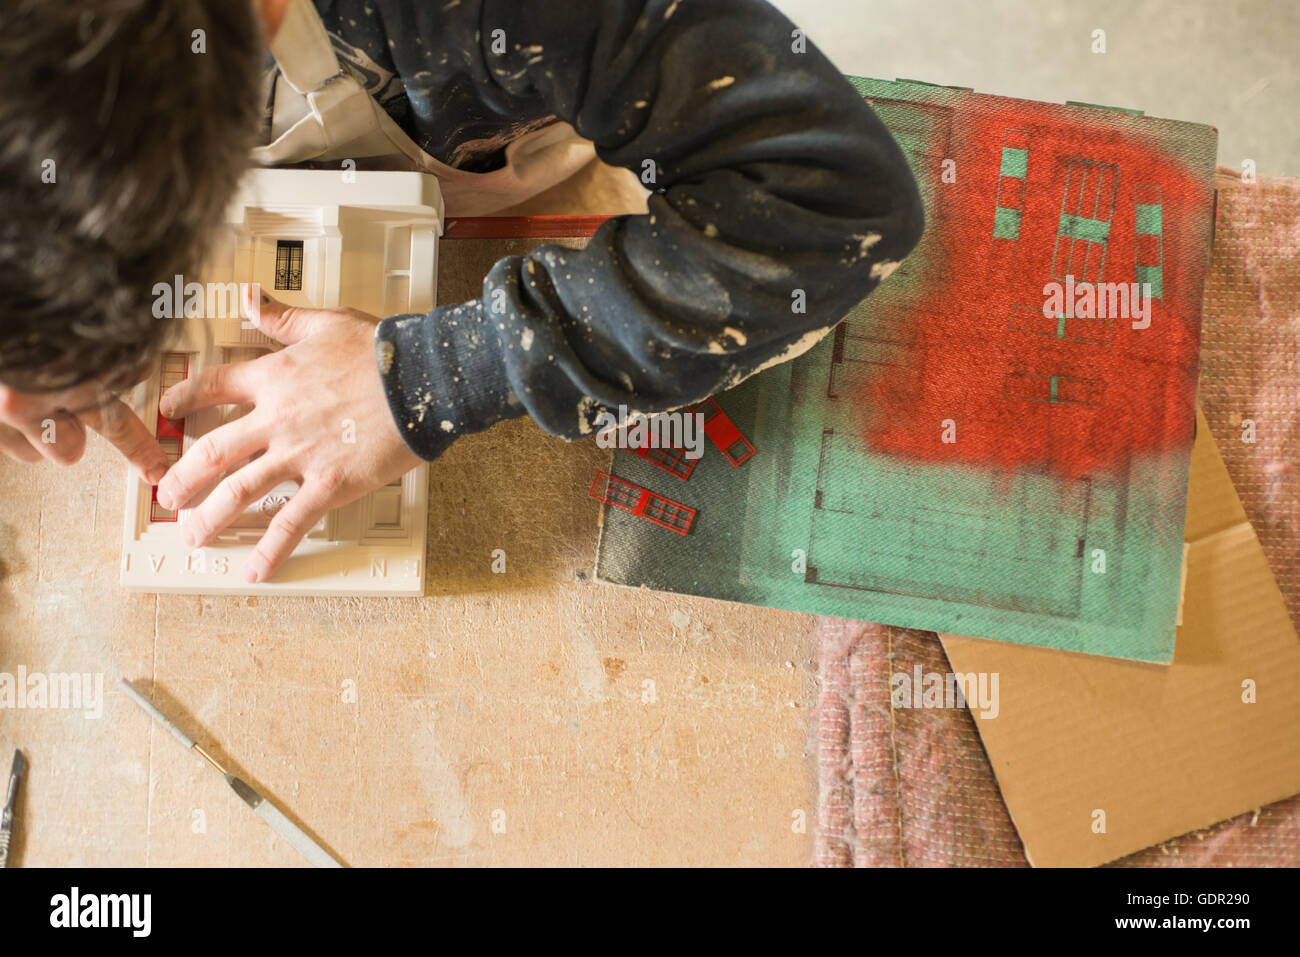 Overhead of a man placing miniature red painted windows on a plaster scale model building on a wooden table. Stock Photo